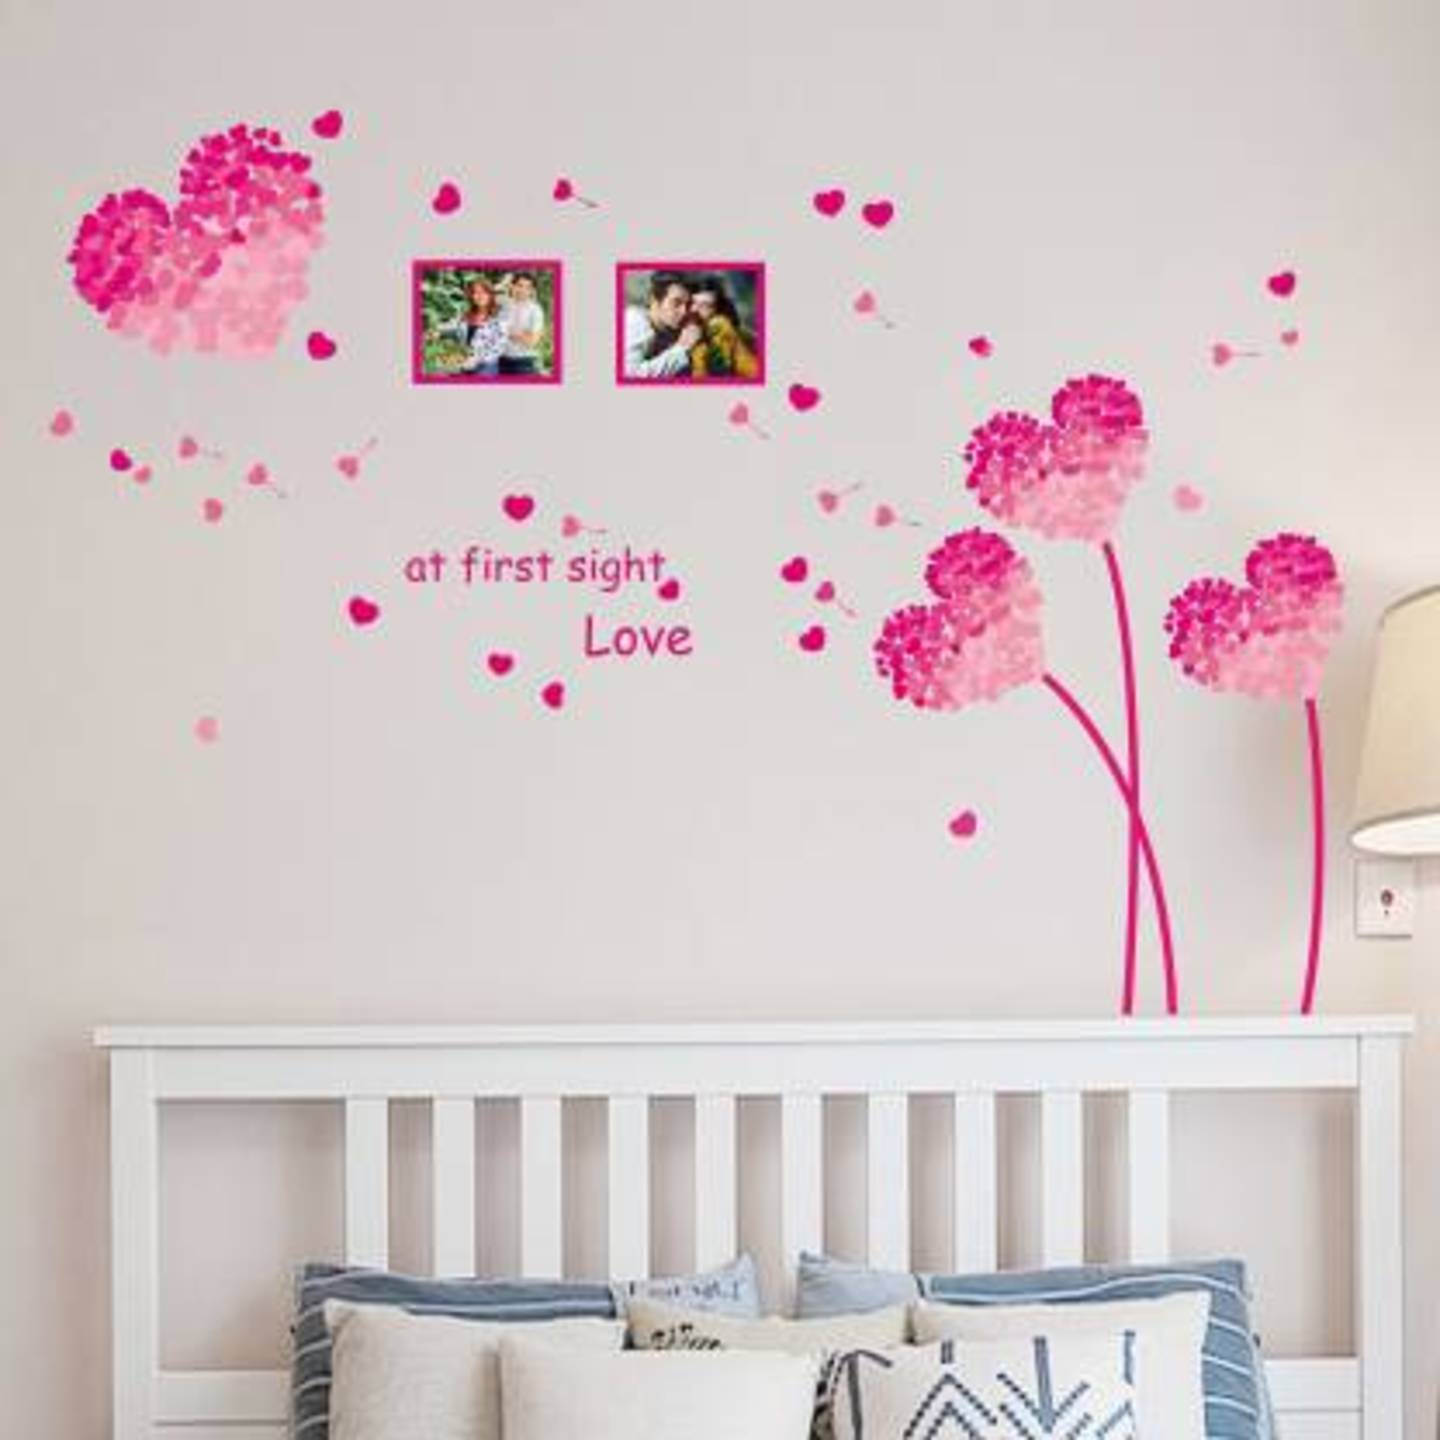 Photos with heart and flowers wall sticker